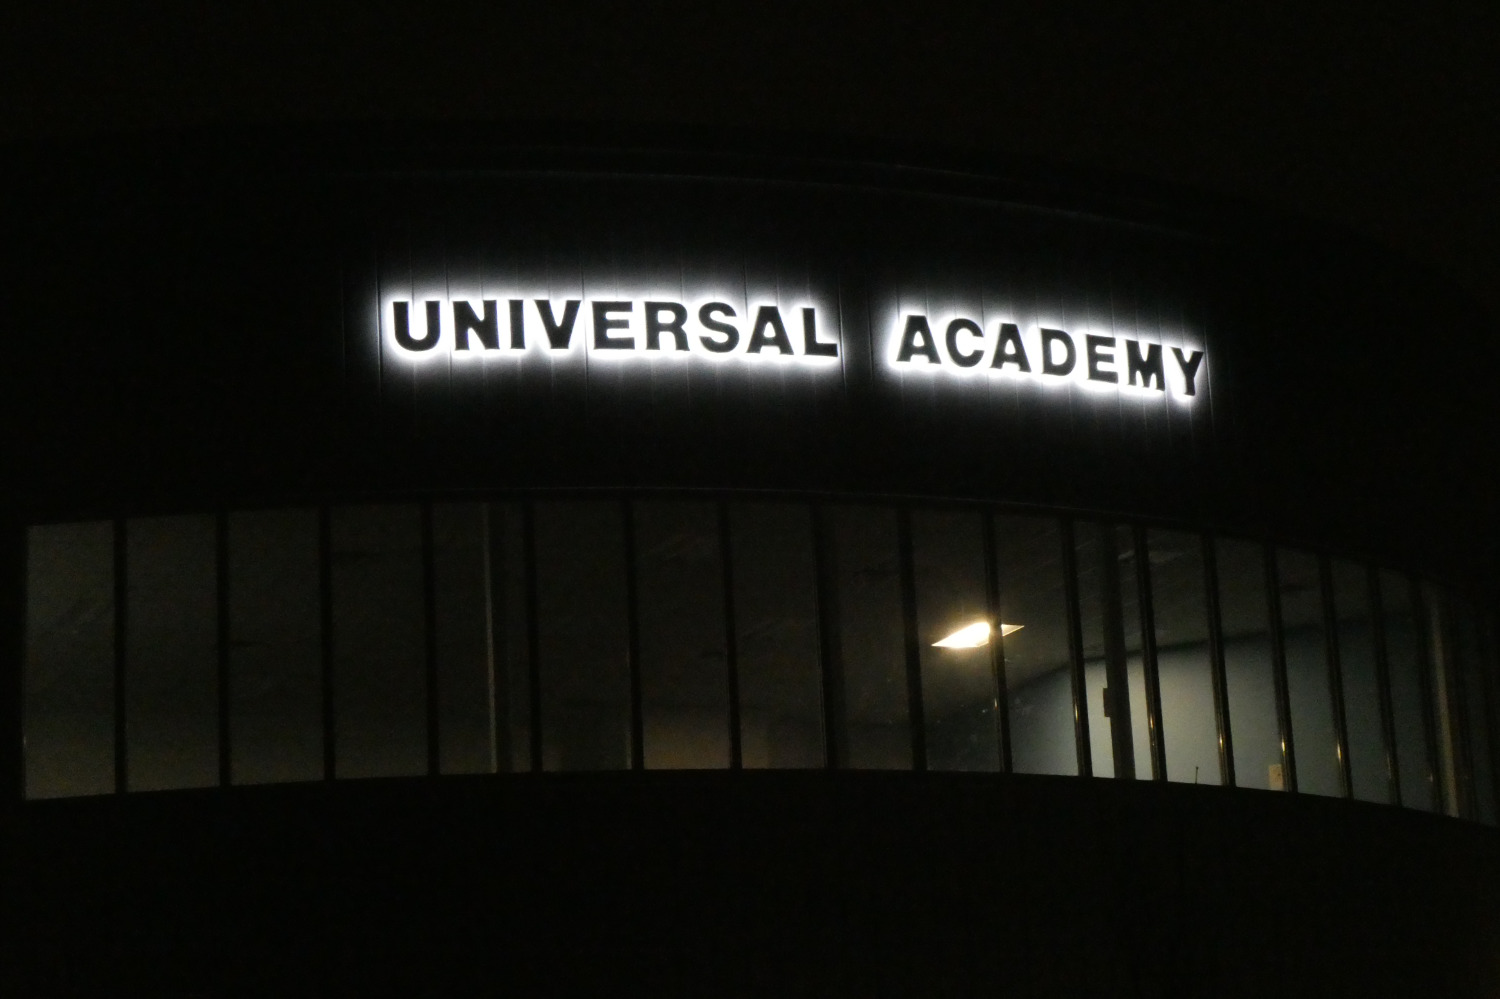 The words "UNIVERSAL ACADEMY" backlit at night in the dark.